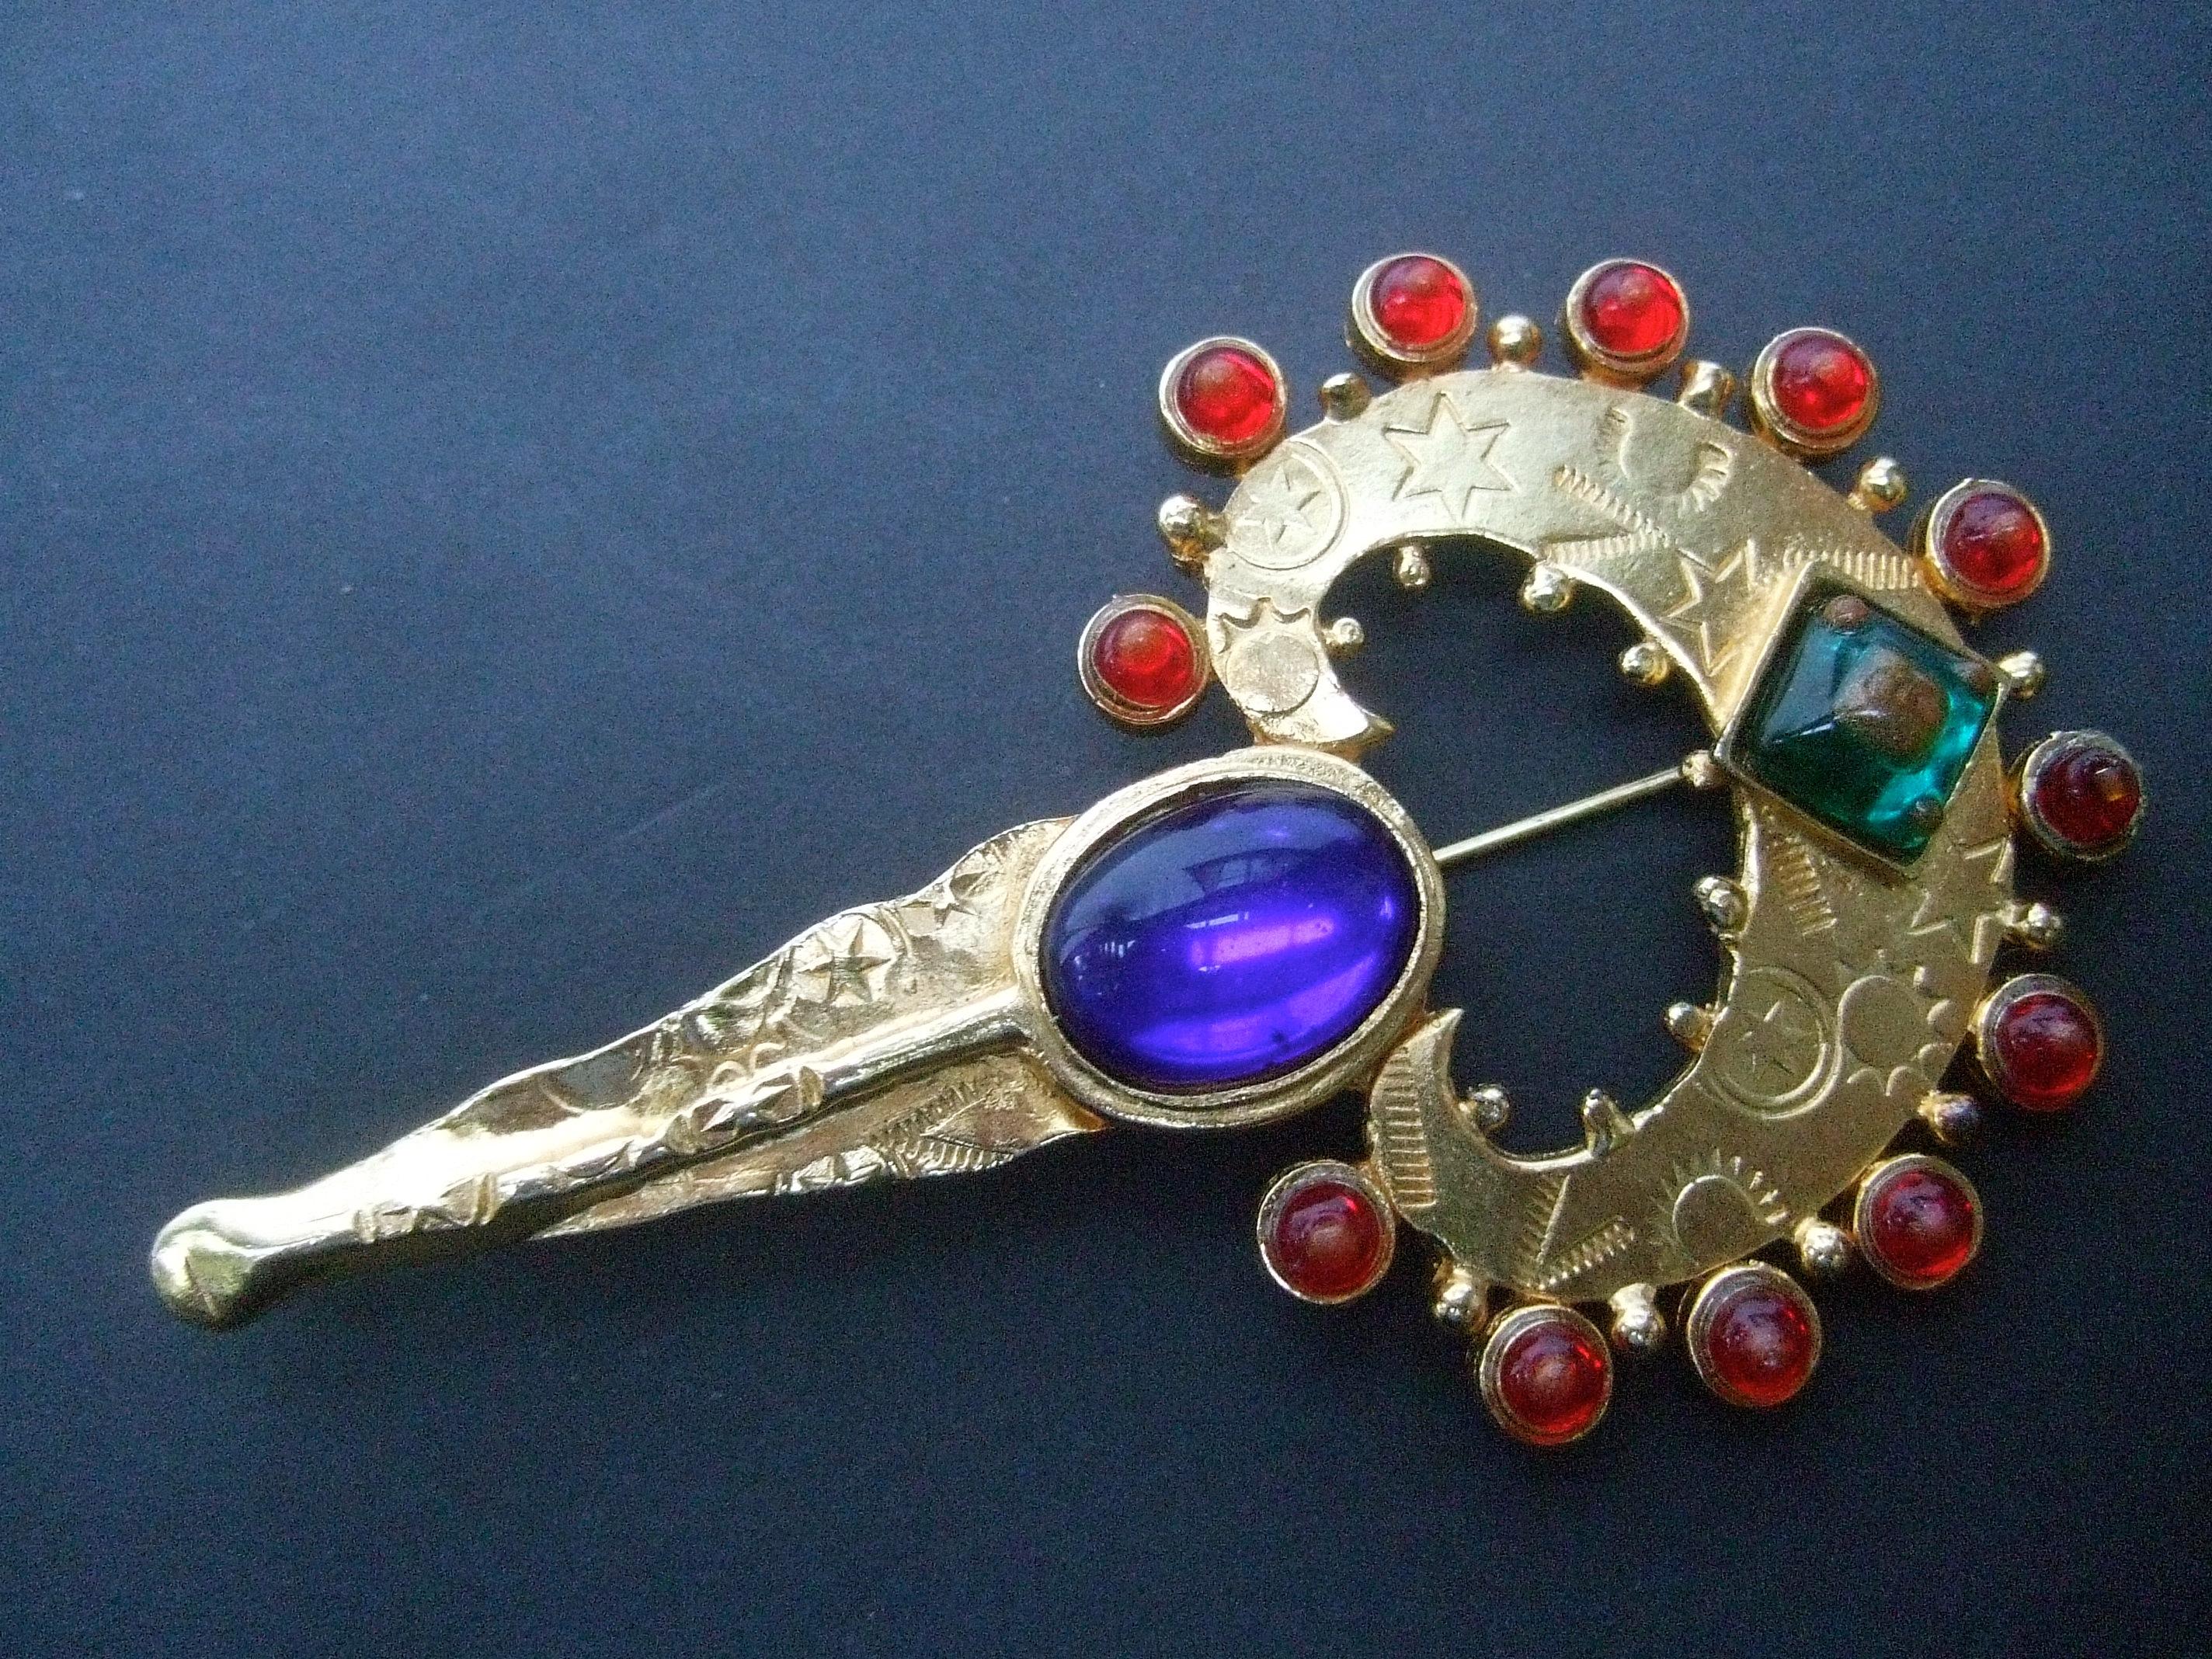 Women's Glass Jeweled Heart & Key Brooch Designed by Robert Rose c 1980s For Sale